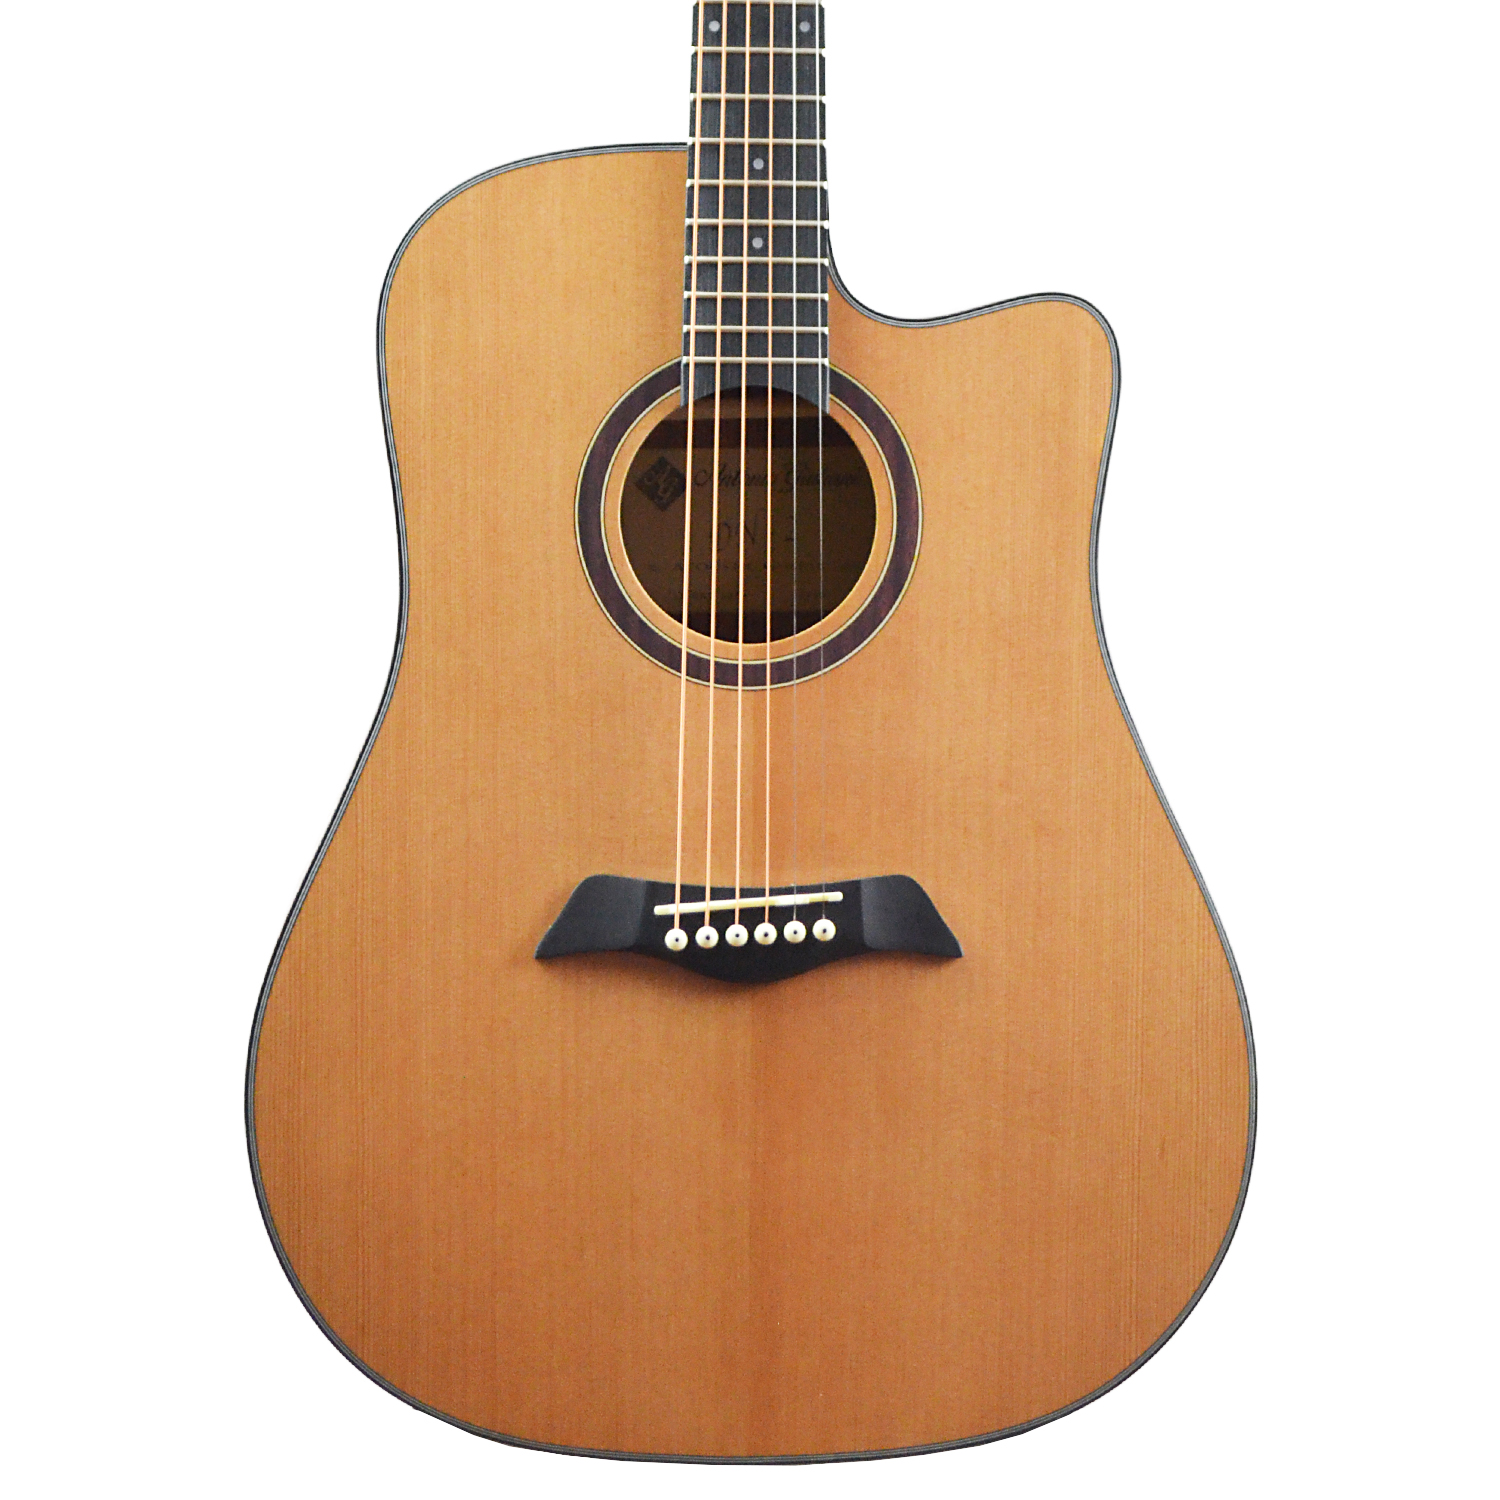 CLEARANCE Antonio Giuliani DN-2 Dreadnought Cutaway Acoustic Guitar Outfit in action